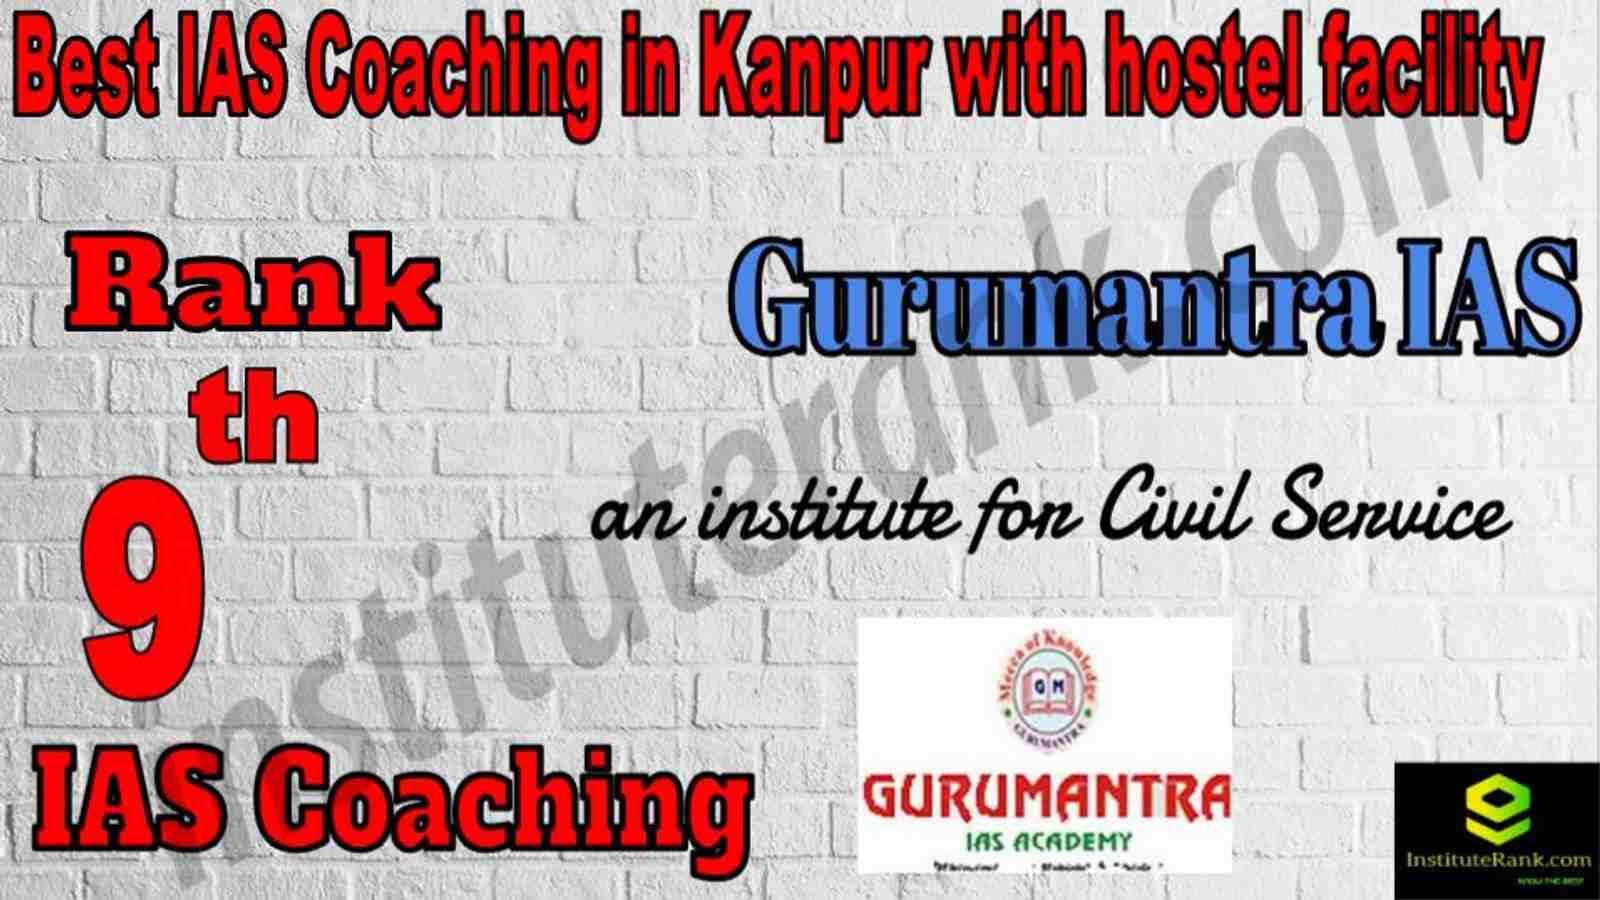 9th Best IAS Coaching in Kanpur With hostel facility